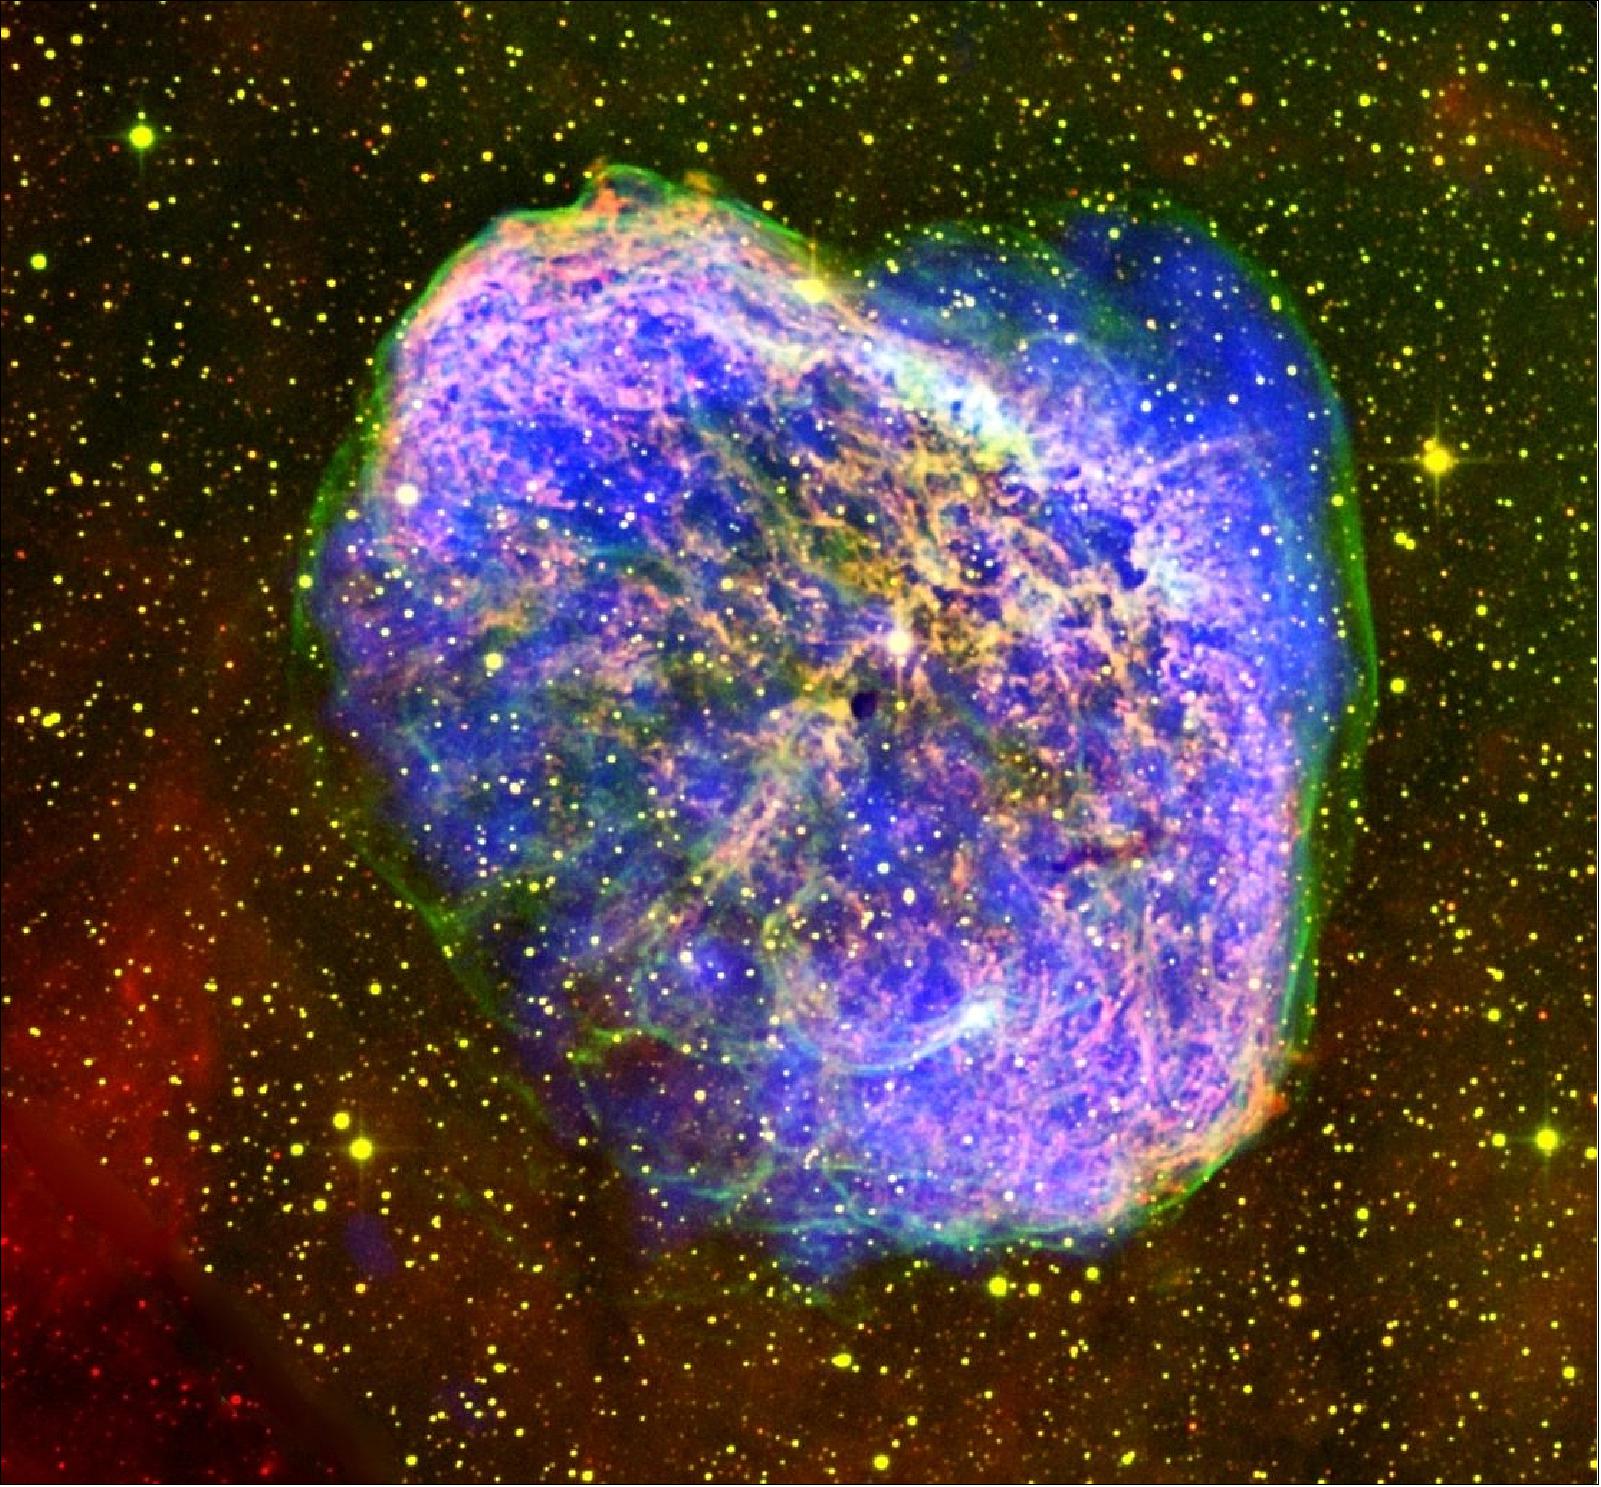 Figure 91: The image shows the detailed structure of the Crescent Nebula that shed a shell of material as it expanded into a red giant some 200 000 years ago. Fast winds emitted more recently have now collided with that material, causing the gasses in the bubble to heat up and emit X-rays, seen as blue in the image. Other features can also be seen, such as the green hue, generated by oxygen atoms, where the star’s wind is interacting with the surrounding interstellar medium. Density differences in the surrounding material may give rise to the different structures, such as the extended bubble segment to the top right (image credit: ESA/XMM-Newton, J. Toalá & D. Goldman)